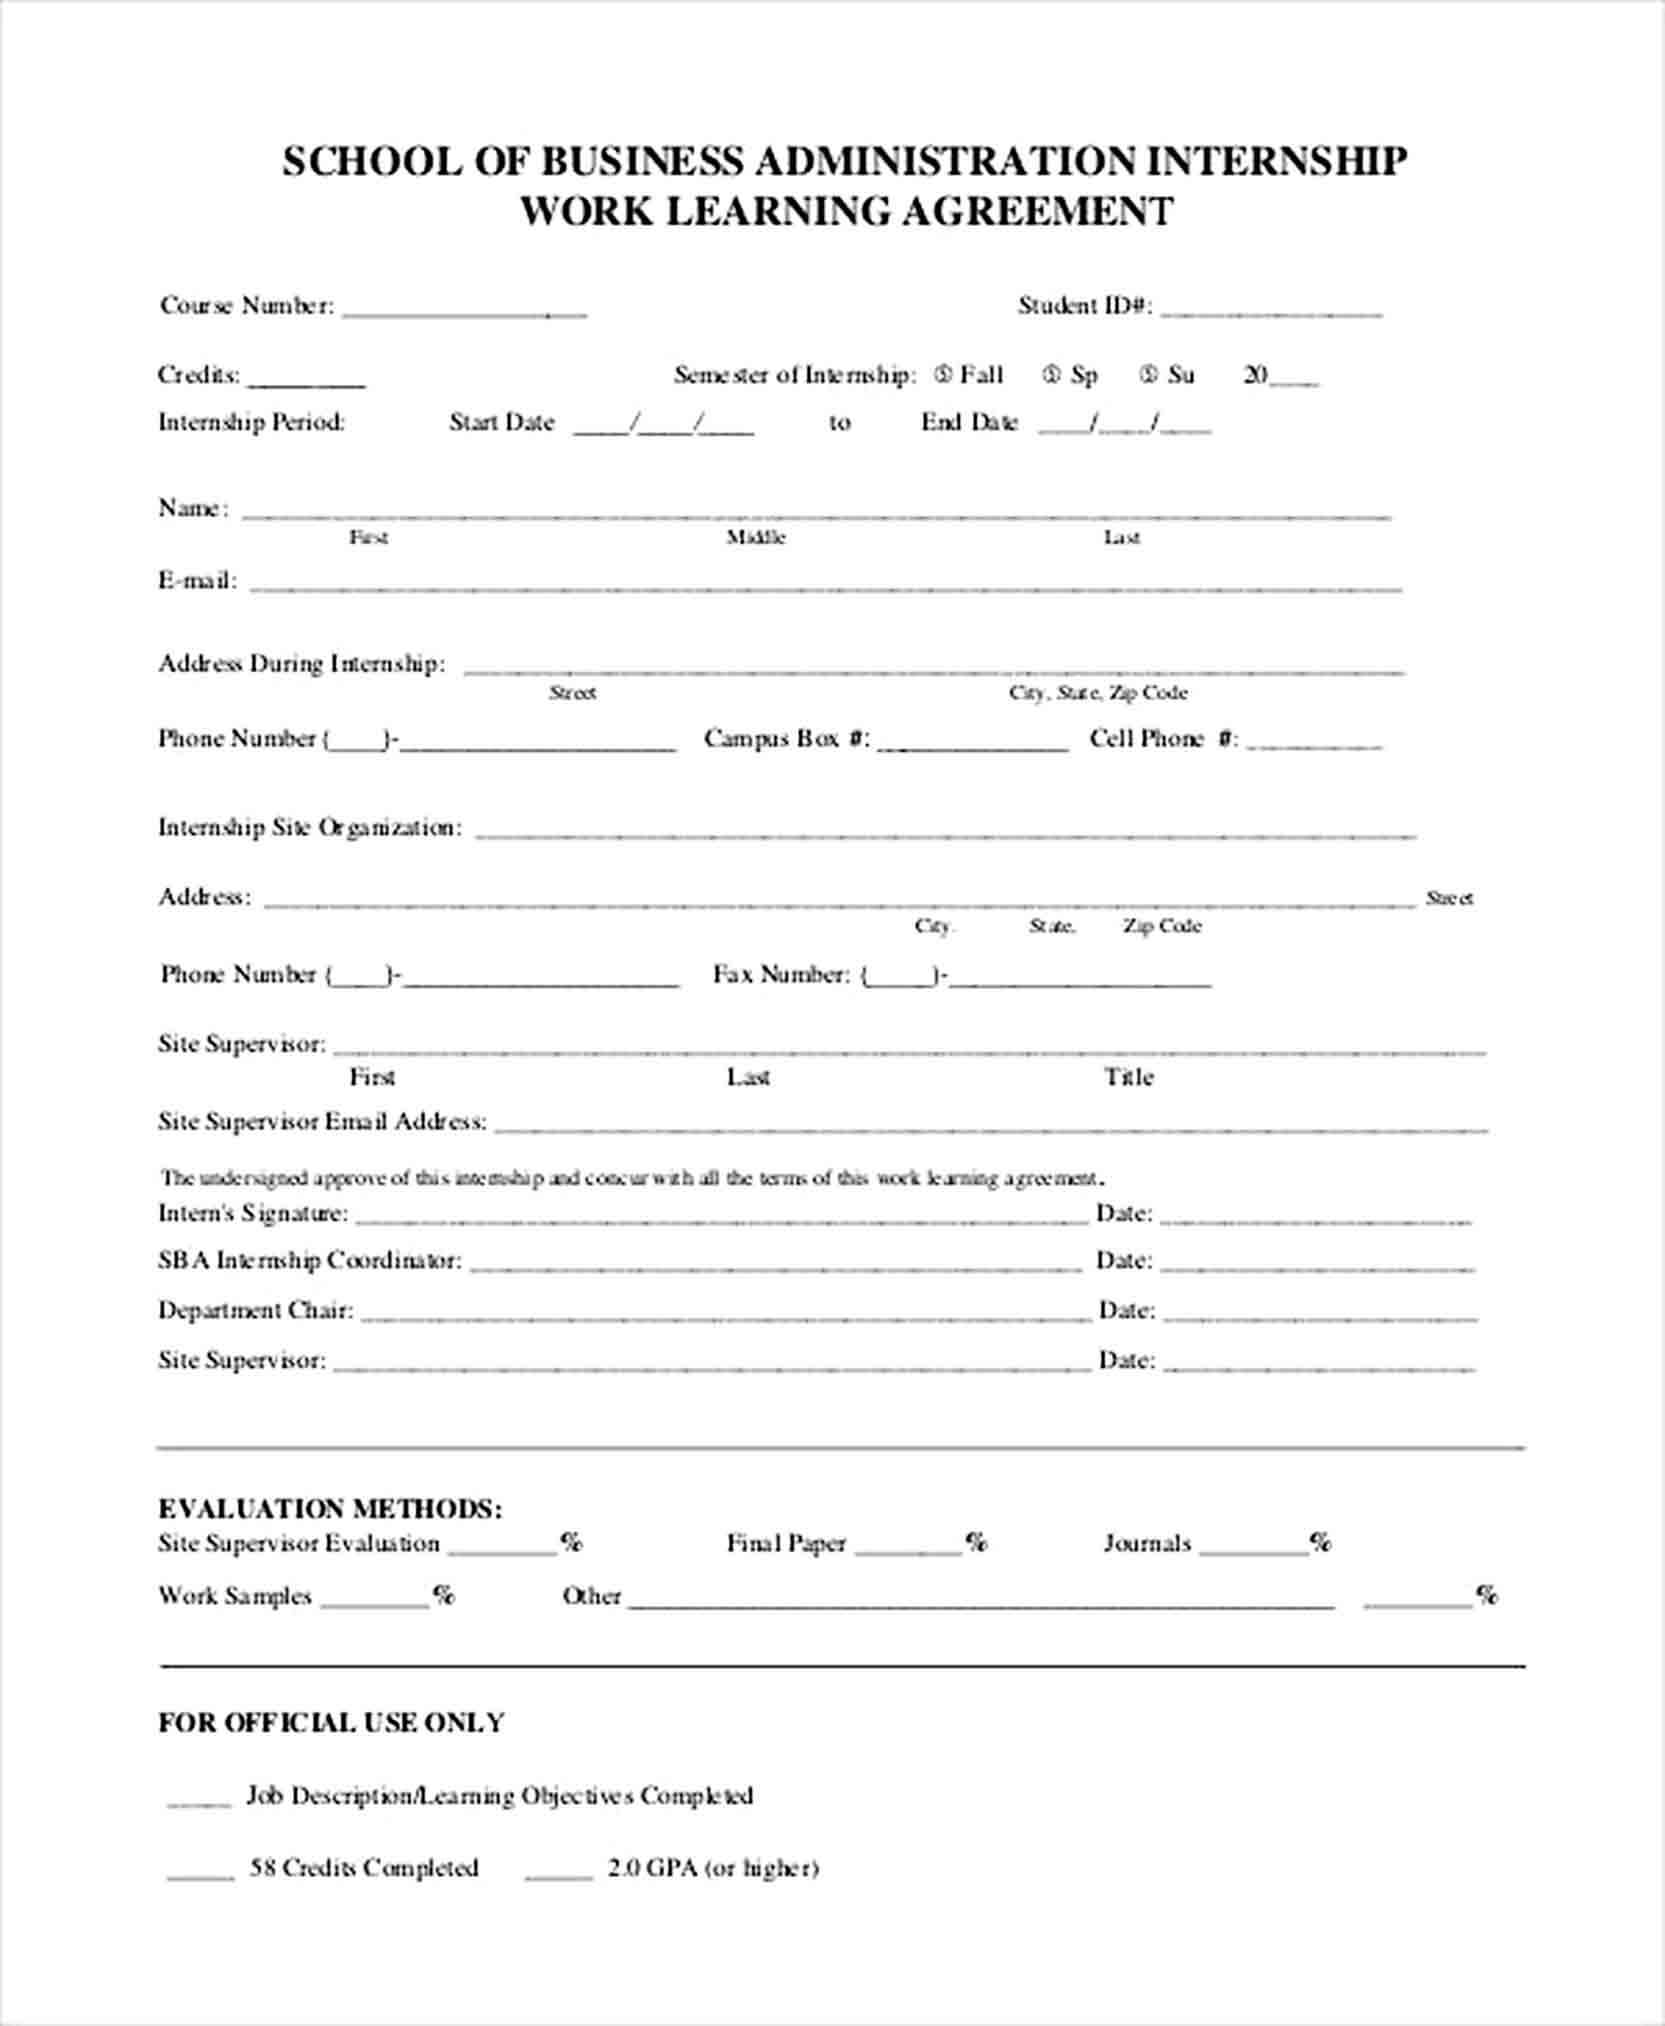 Sample Business Administration Learning Agreement